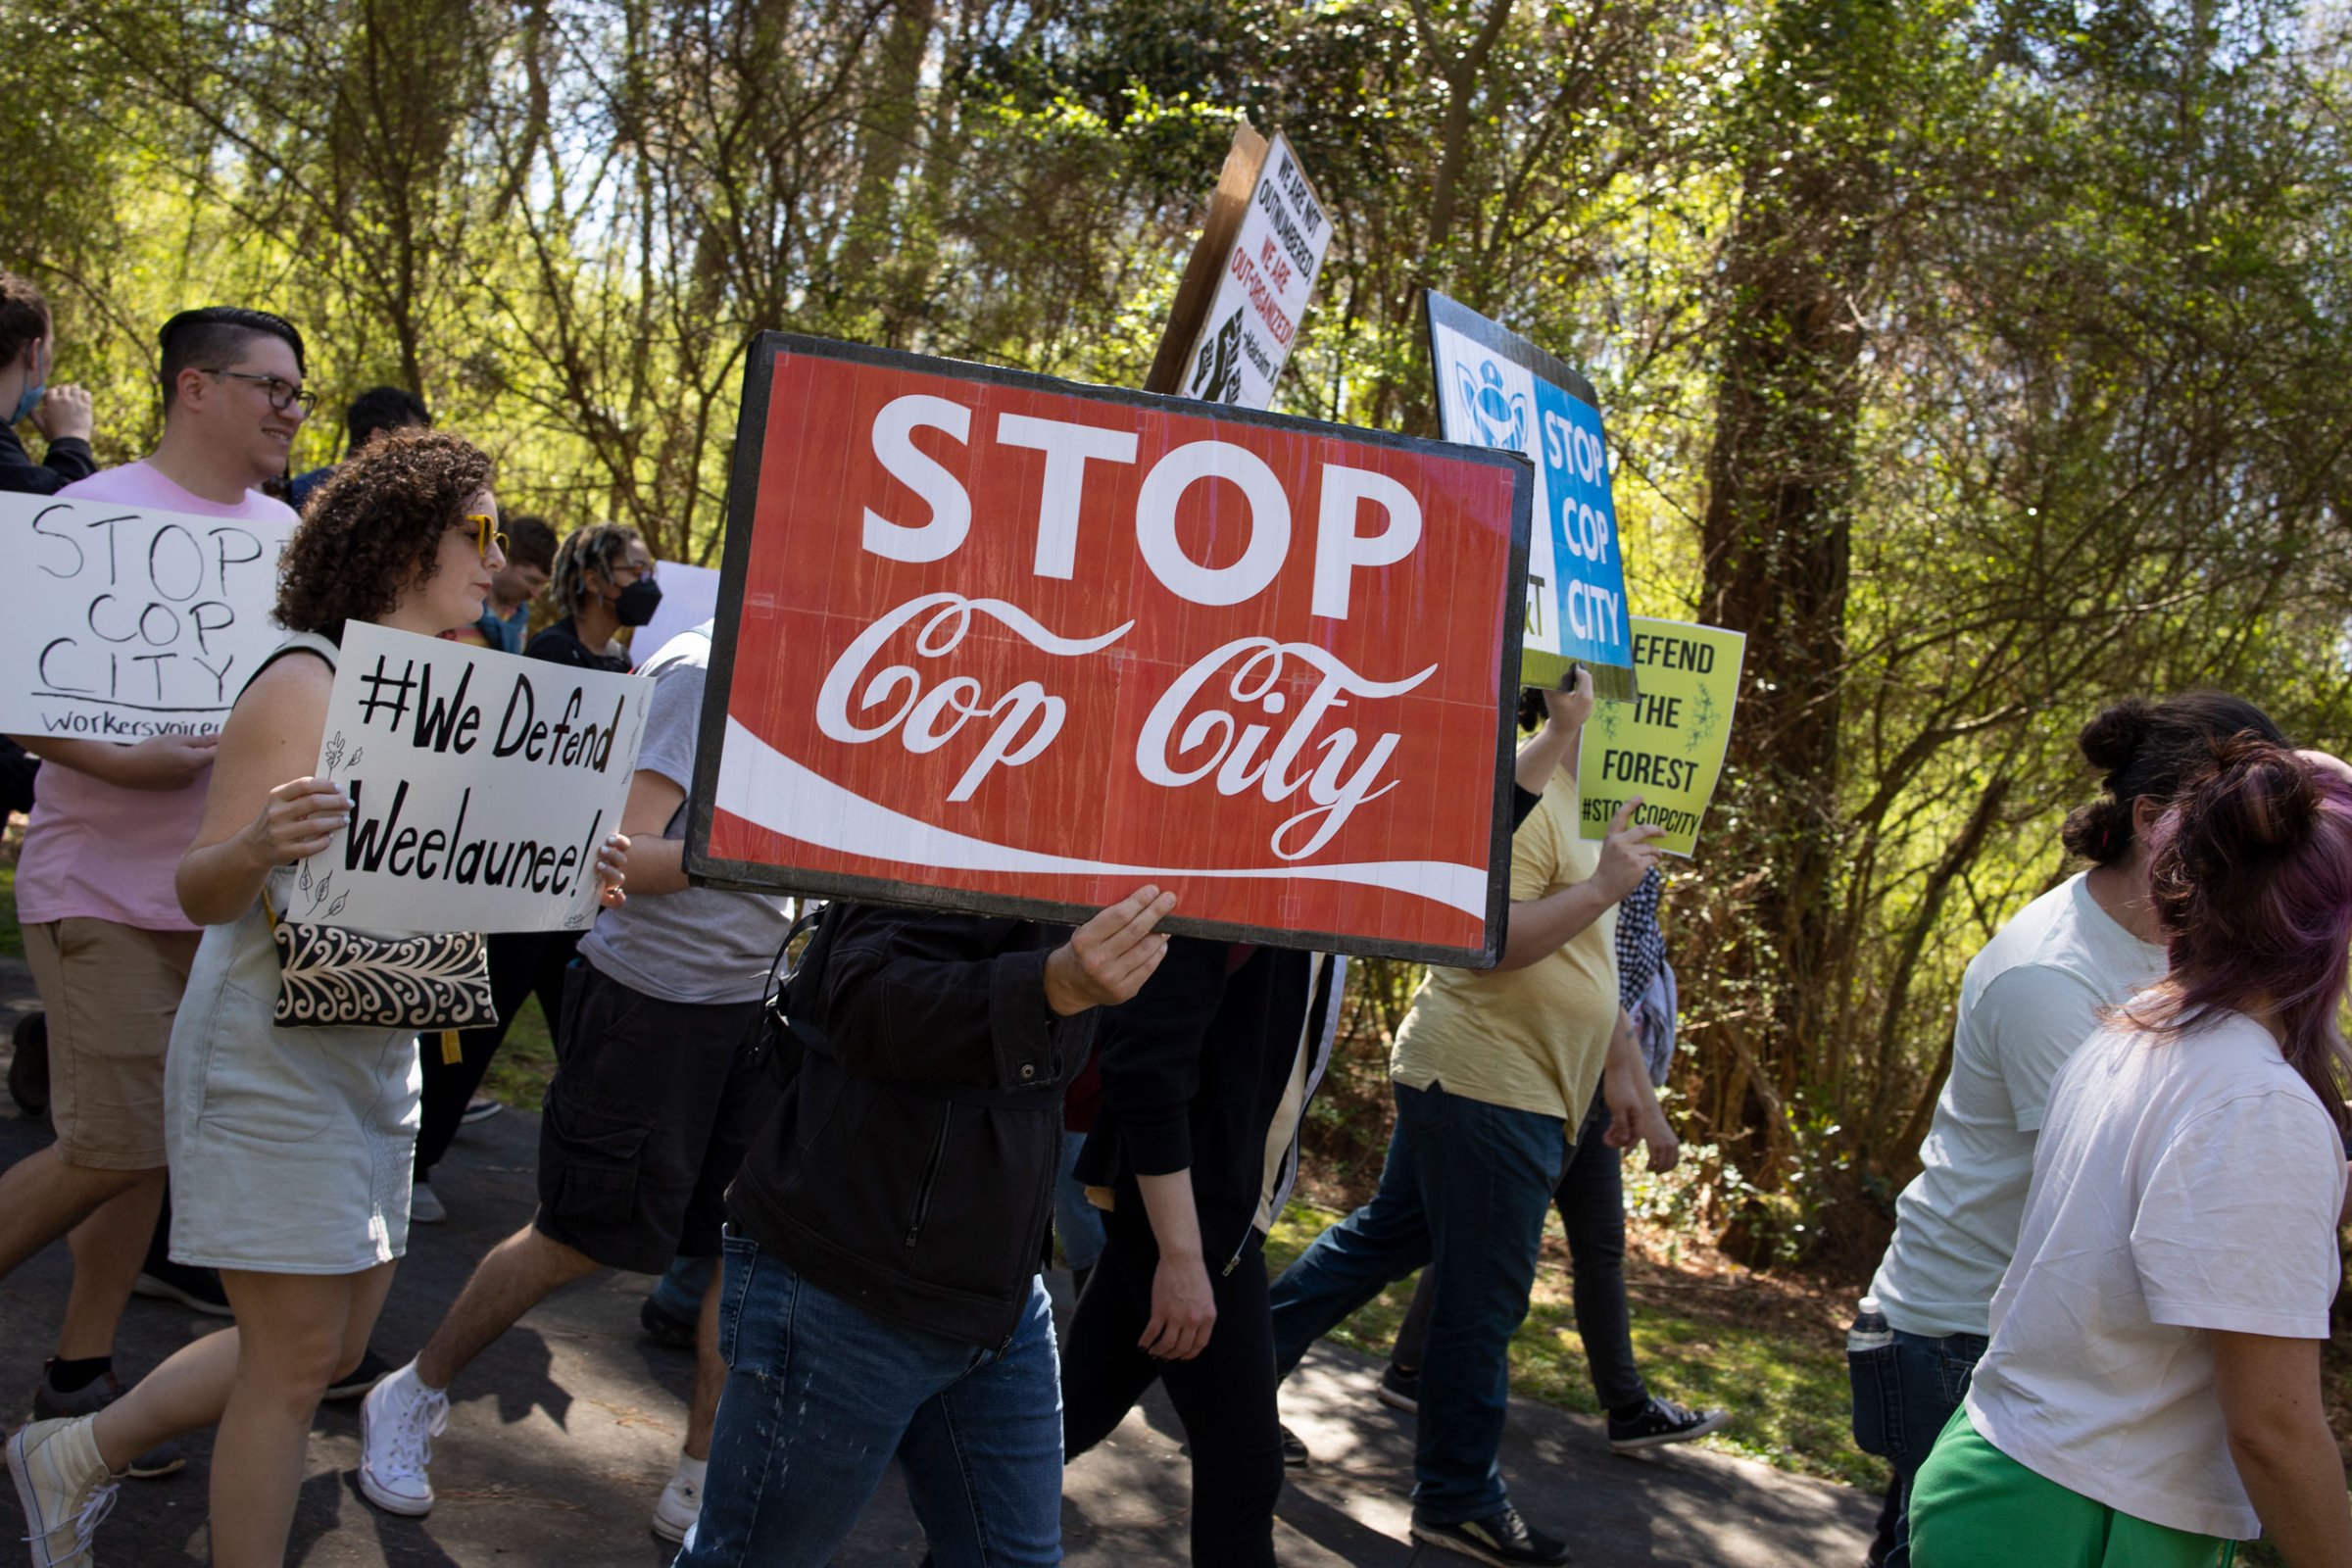 Activists march through a forest holding signs protesting the Cop City development